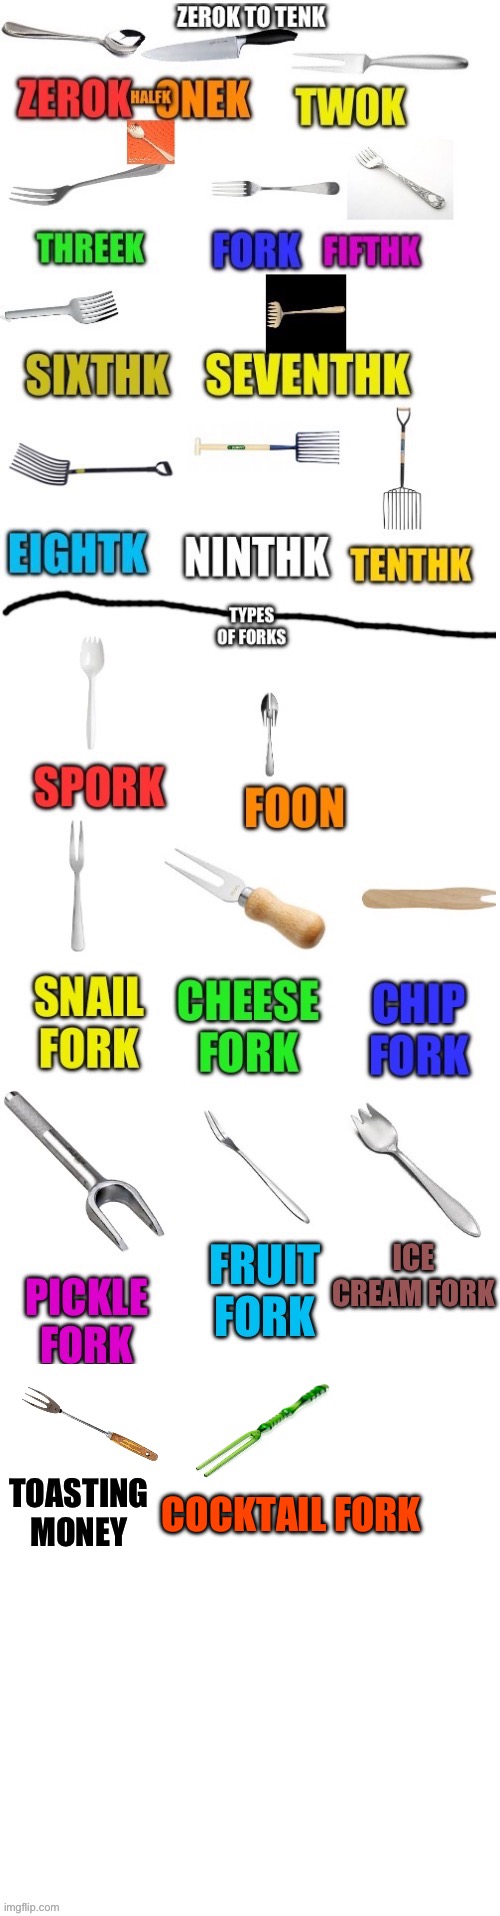 2 new forks | TOASTING MONEY; COCKTAIL FORK | image tagged in zerok tenk types of forks | made w/ Imgflip meme maker